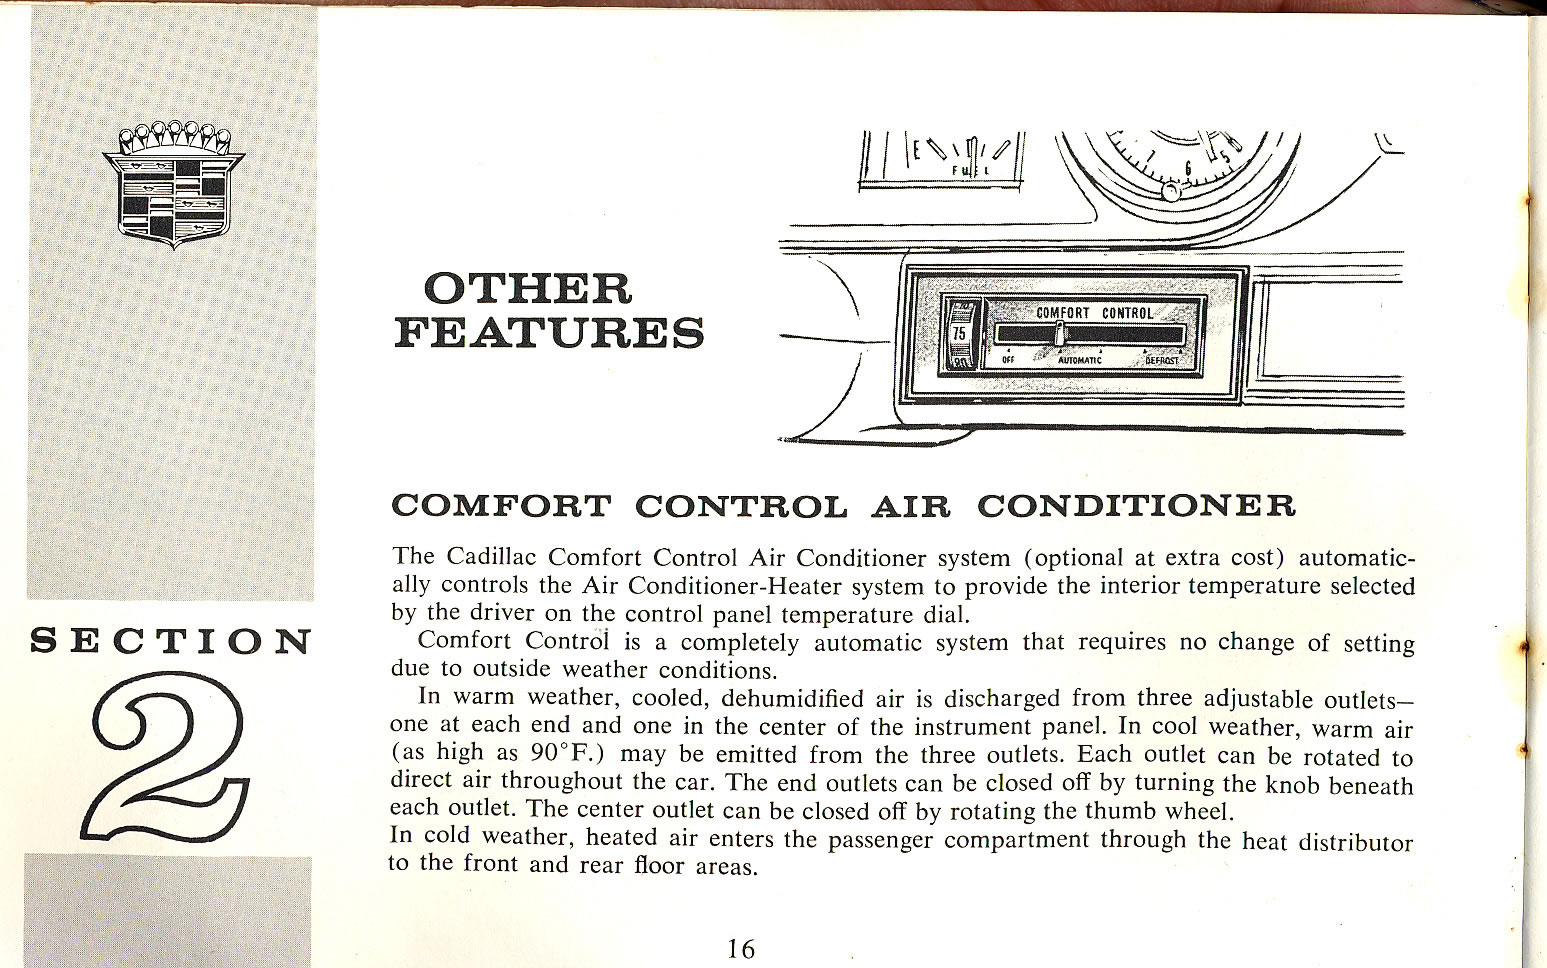 1965 Cadillac Owners Manual Page 26